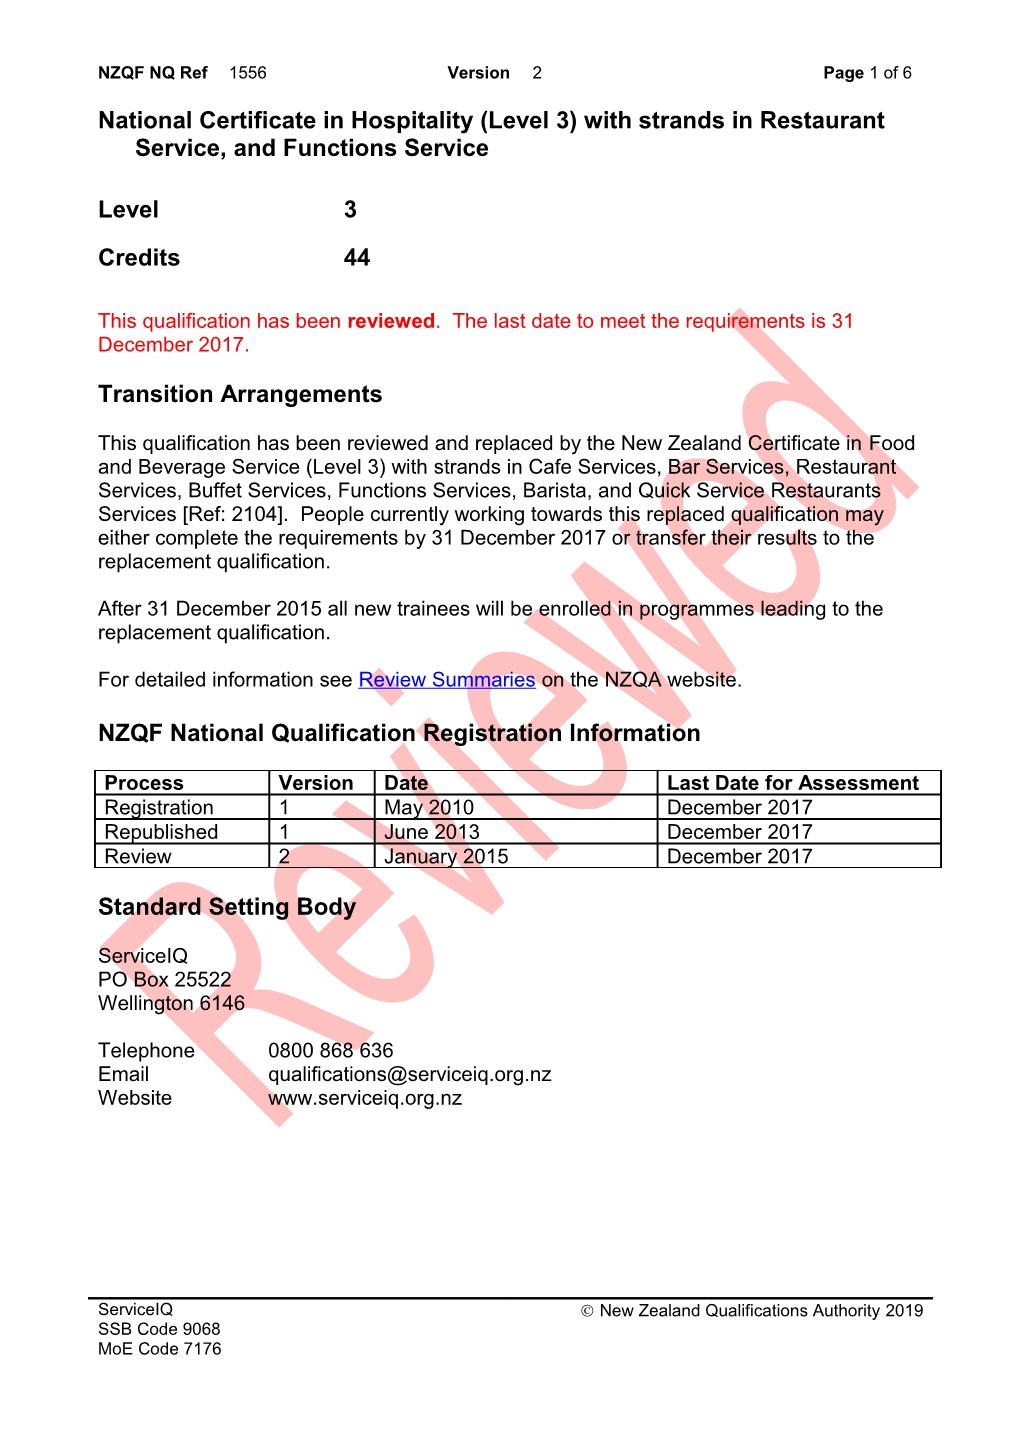 1556 National Certificate in Hospitality (Level 3) with Strands in Restaurant Service